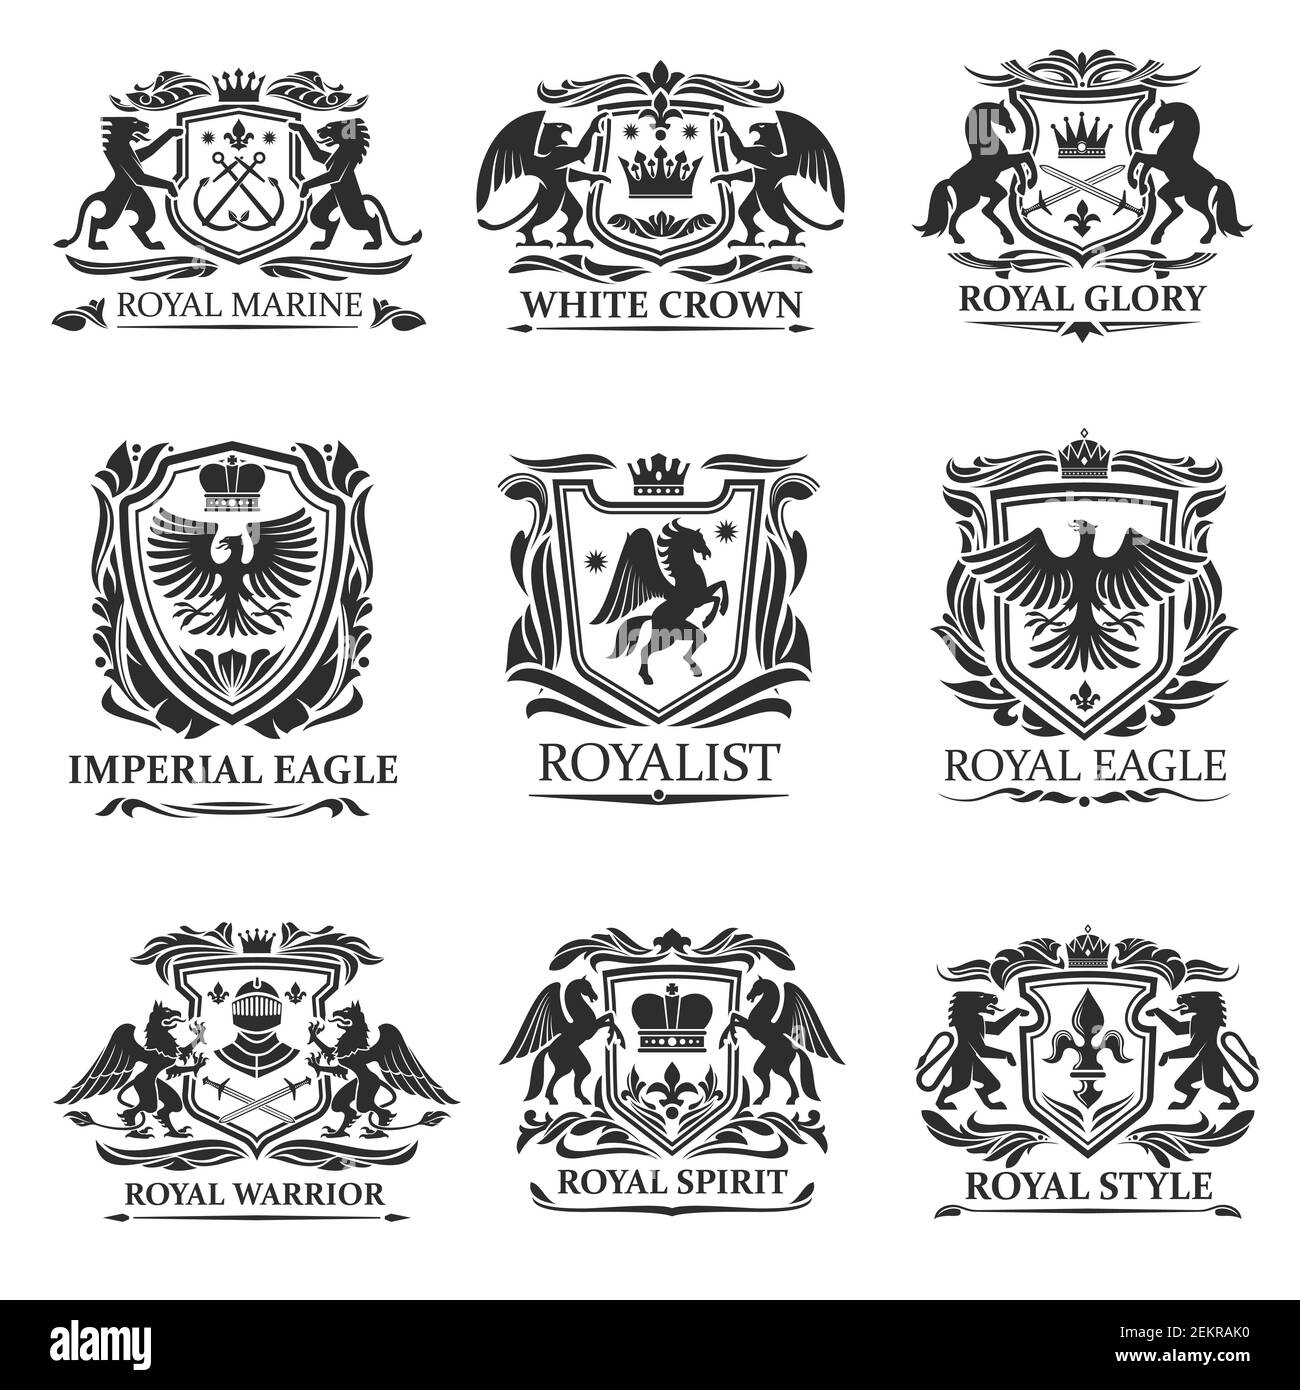 Shield badges and emblems vector design of royal heraldry. Heraldic coat of arms with lions, eagles and king crowns, knight swords, helmets and horses Stock Vector